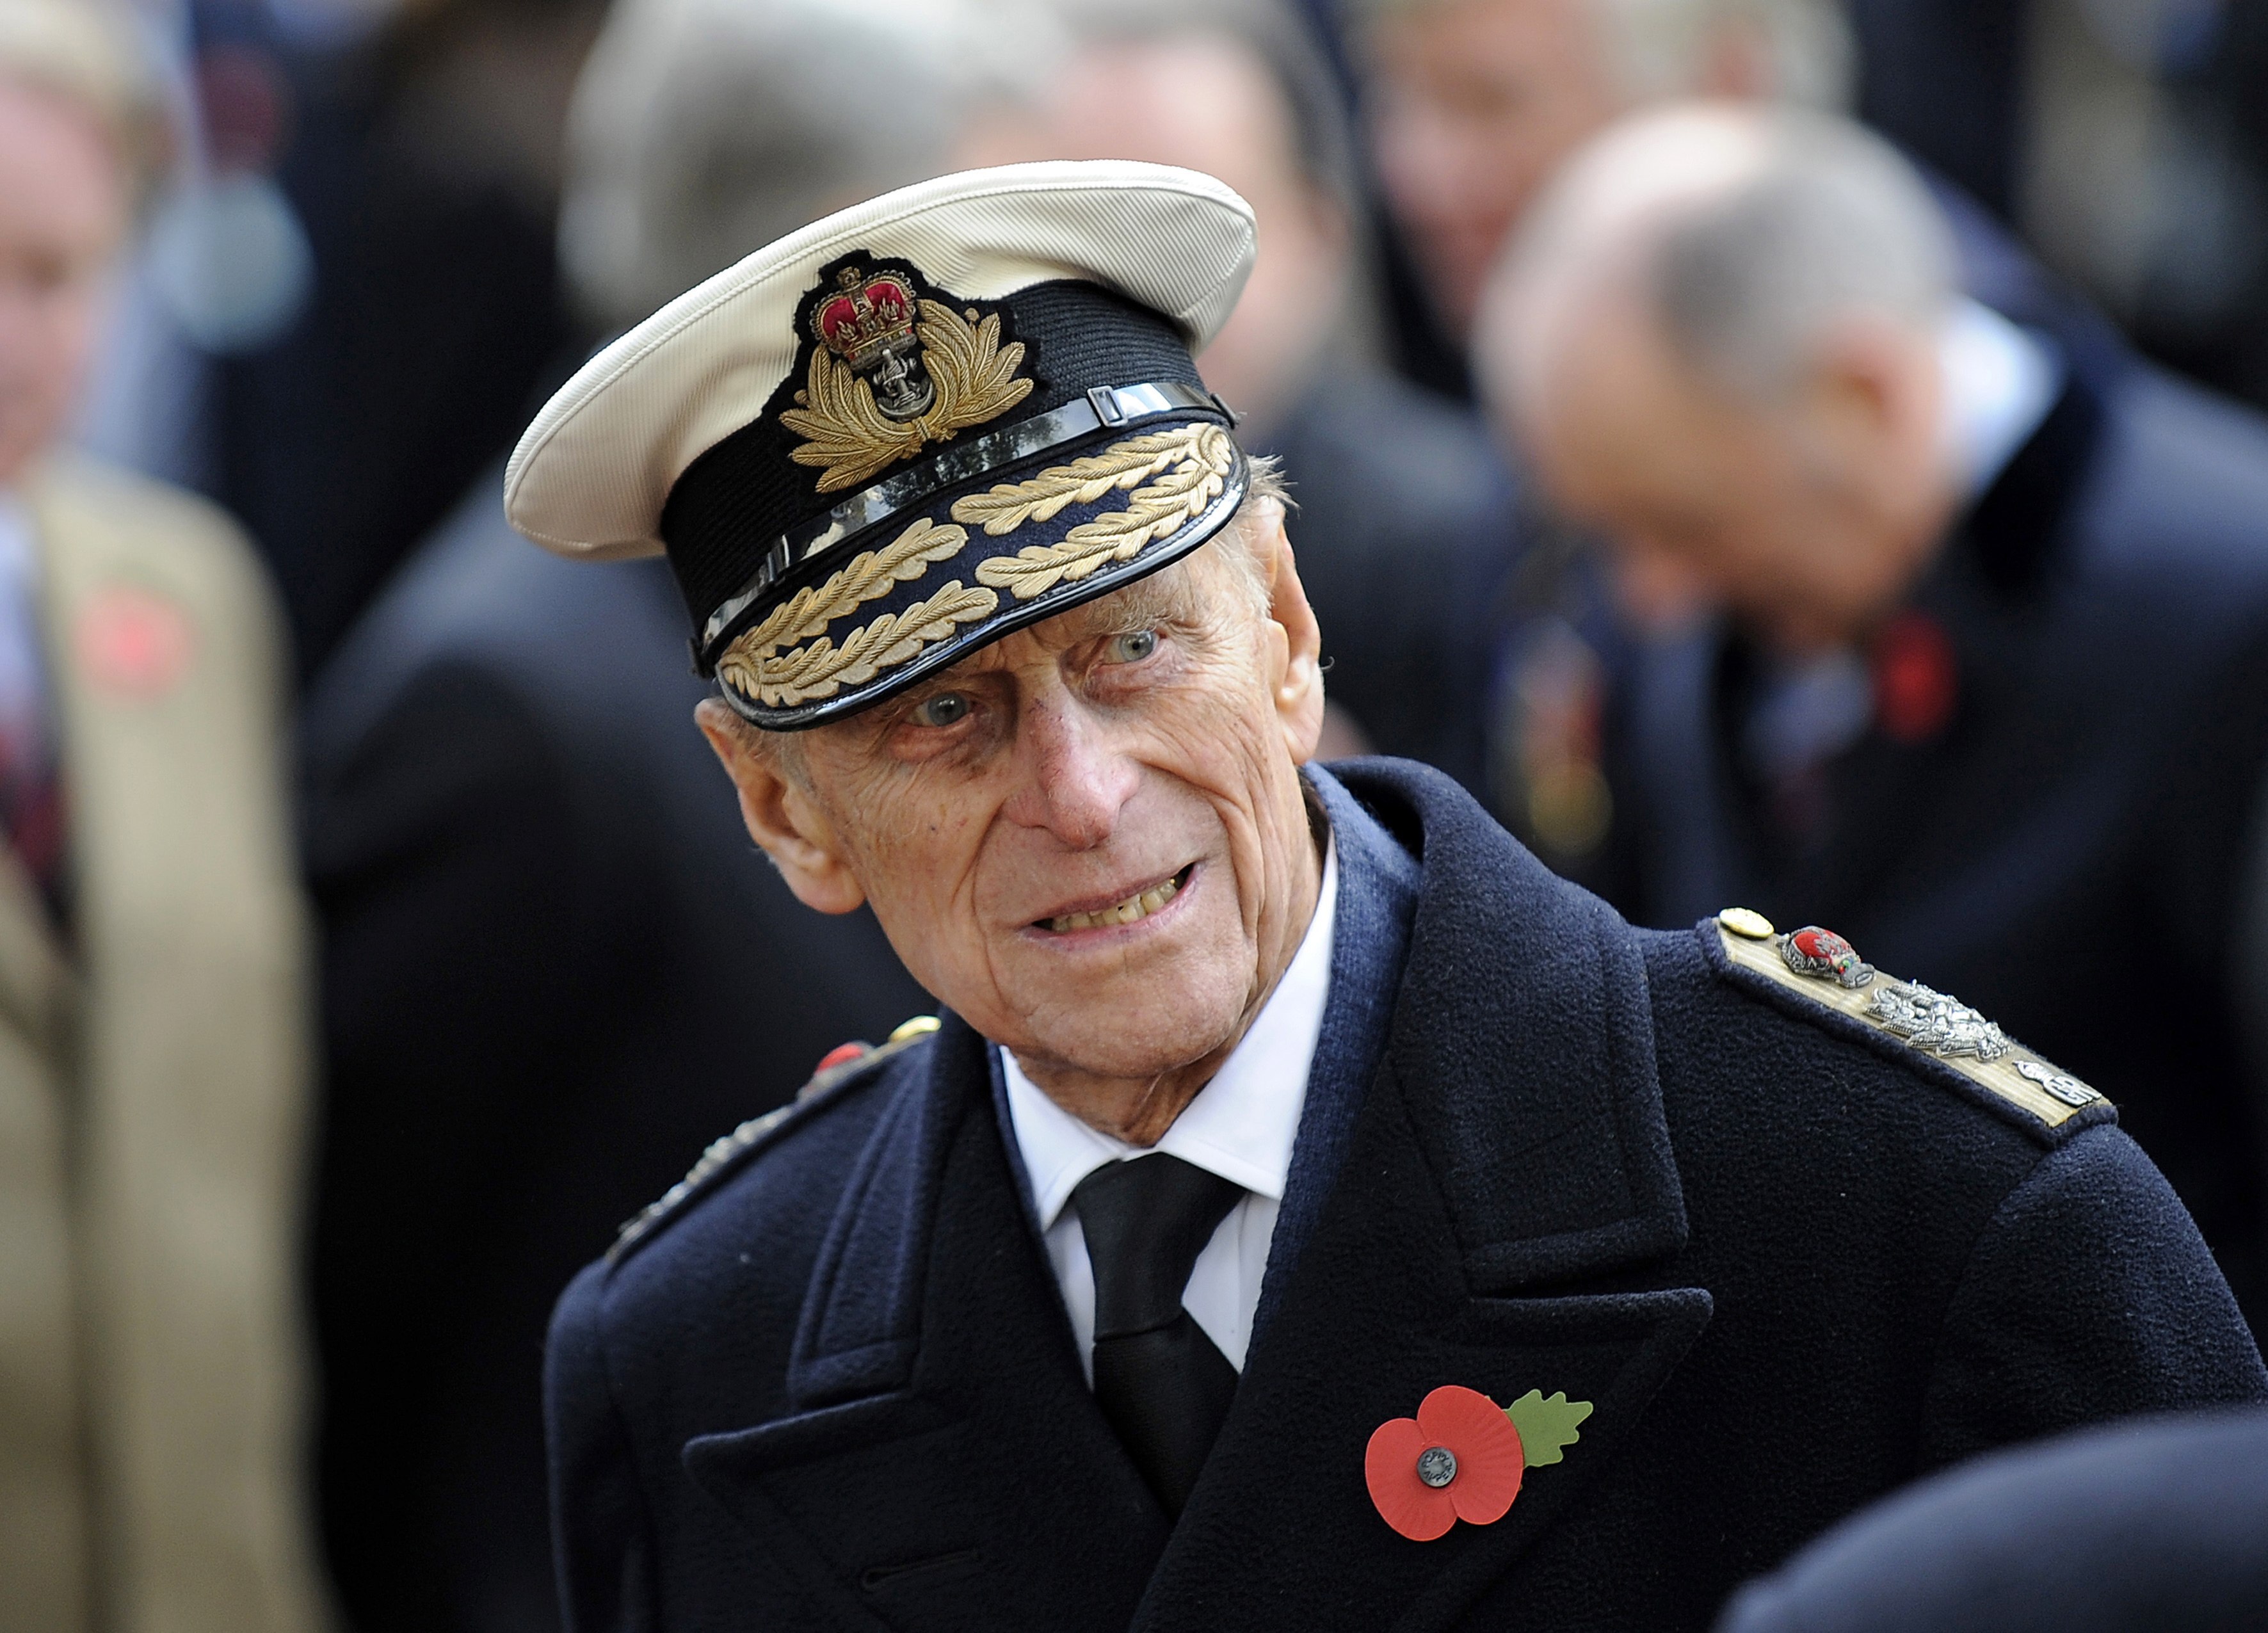 Prince Philip, the Duke of Edinburgh, meeting war veterans at the field of remembrance at Westminster Abbey in London, Britain, in 2012. He passed away on April 9, 2021. Photo: EPA-EFE